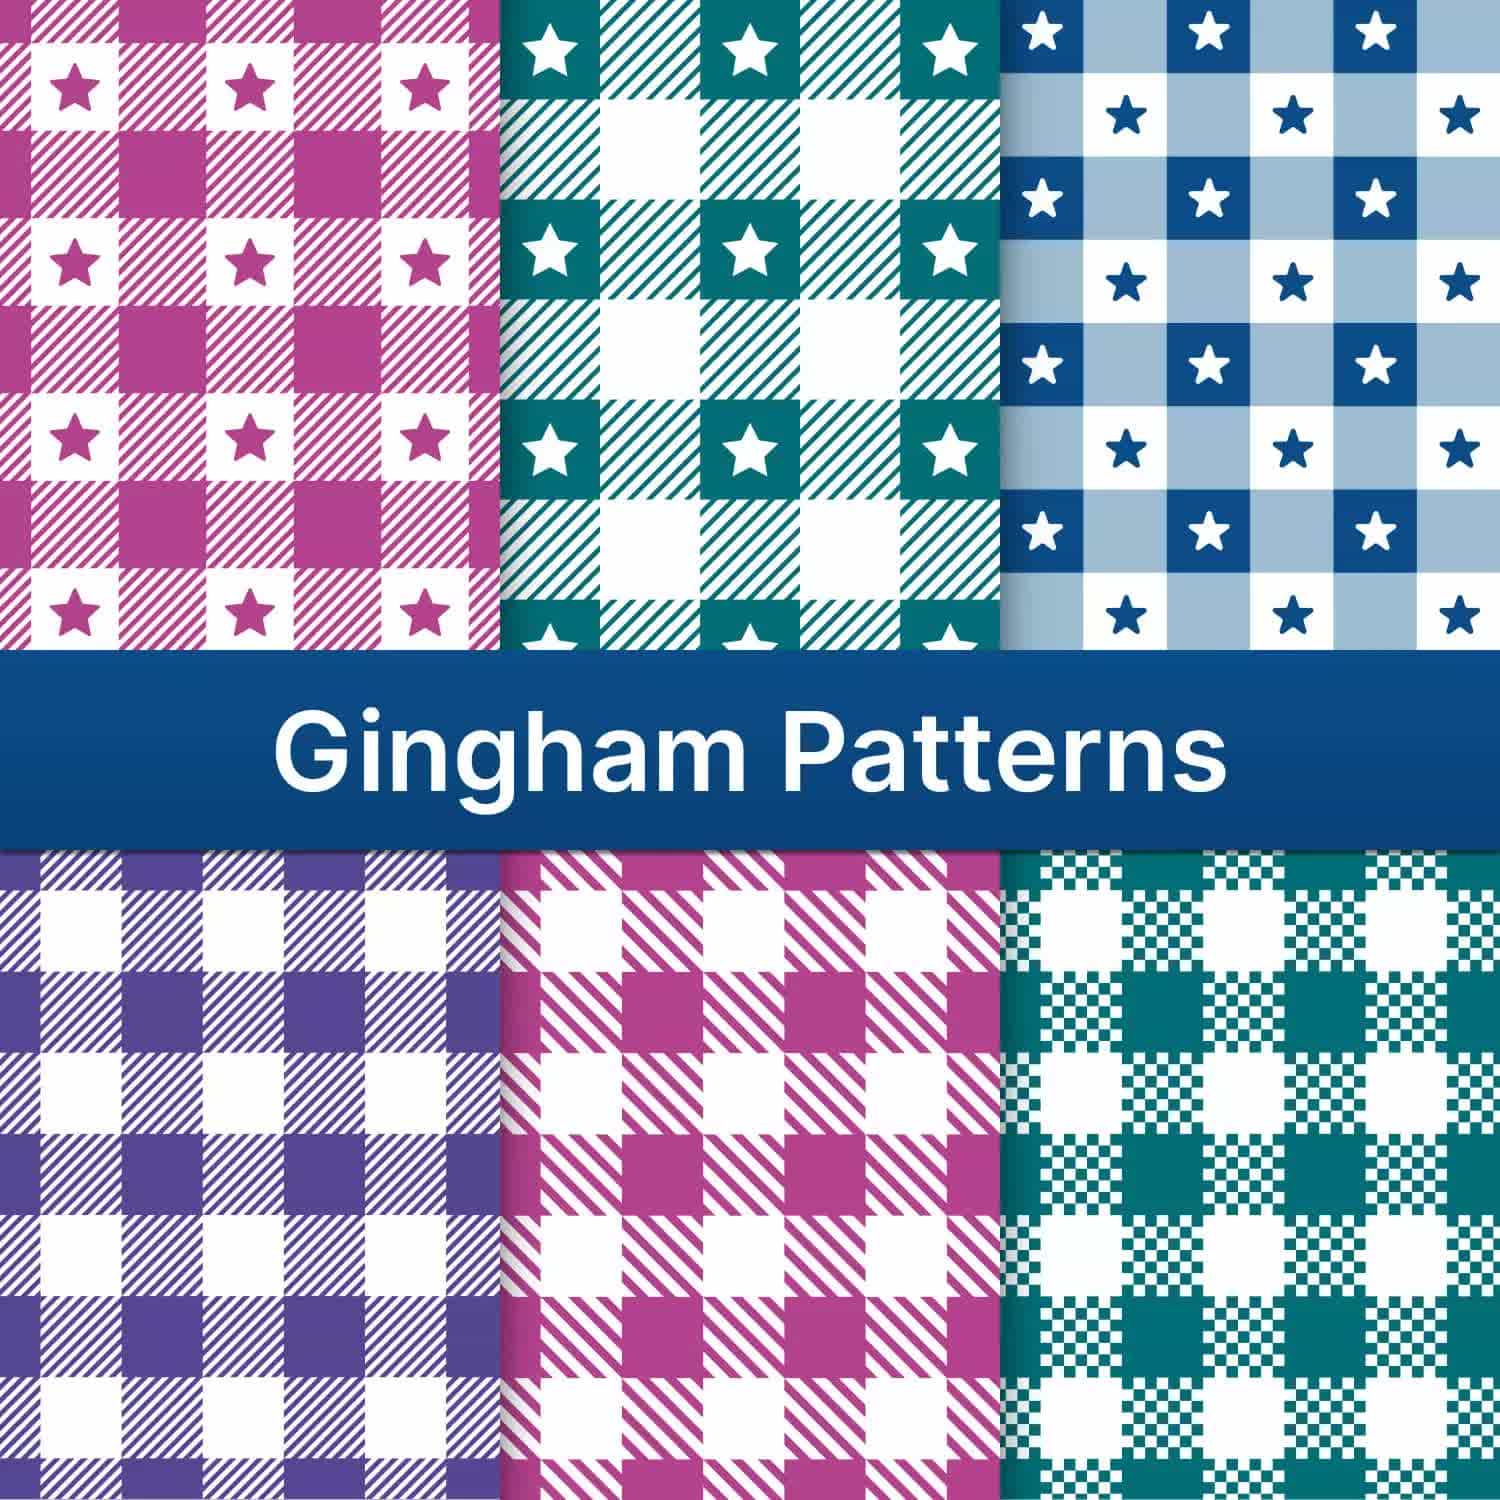 Gingham Patterns Preview 1.